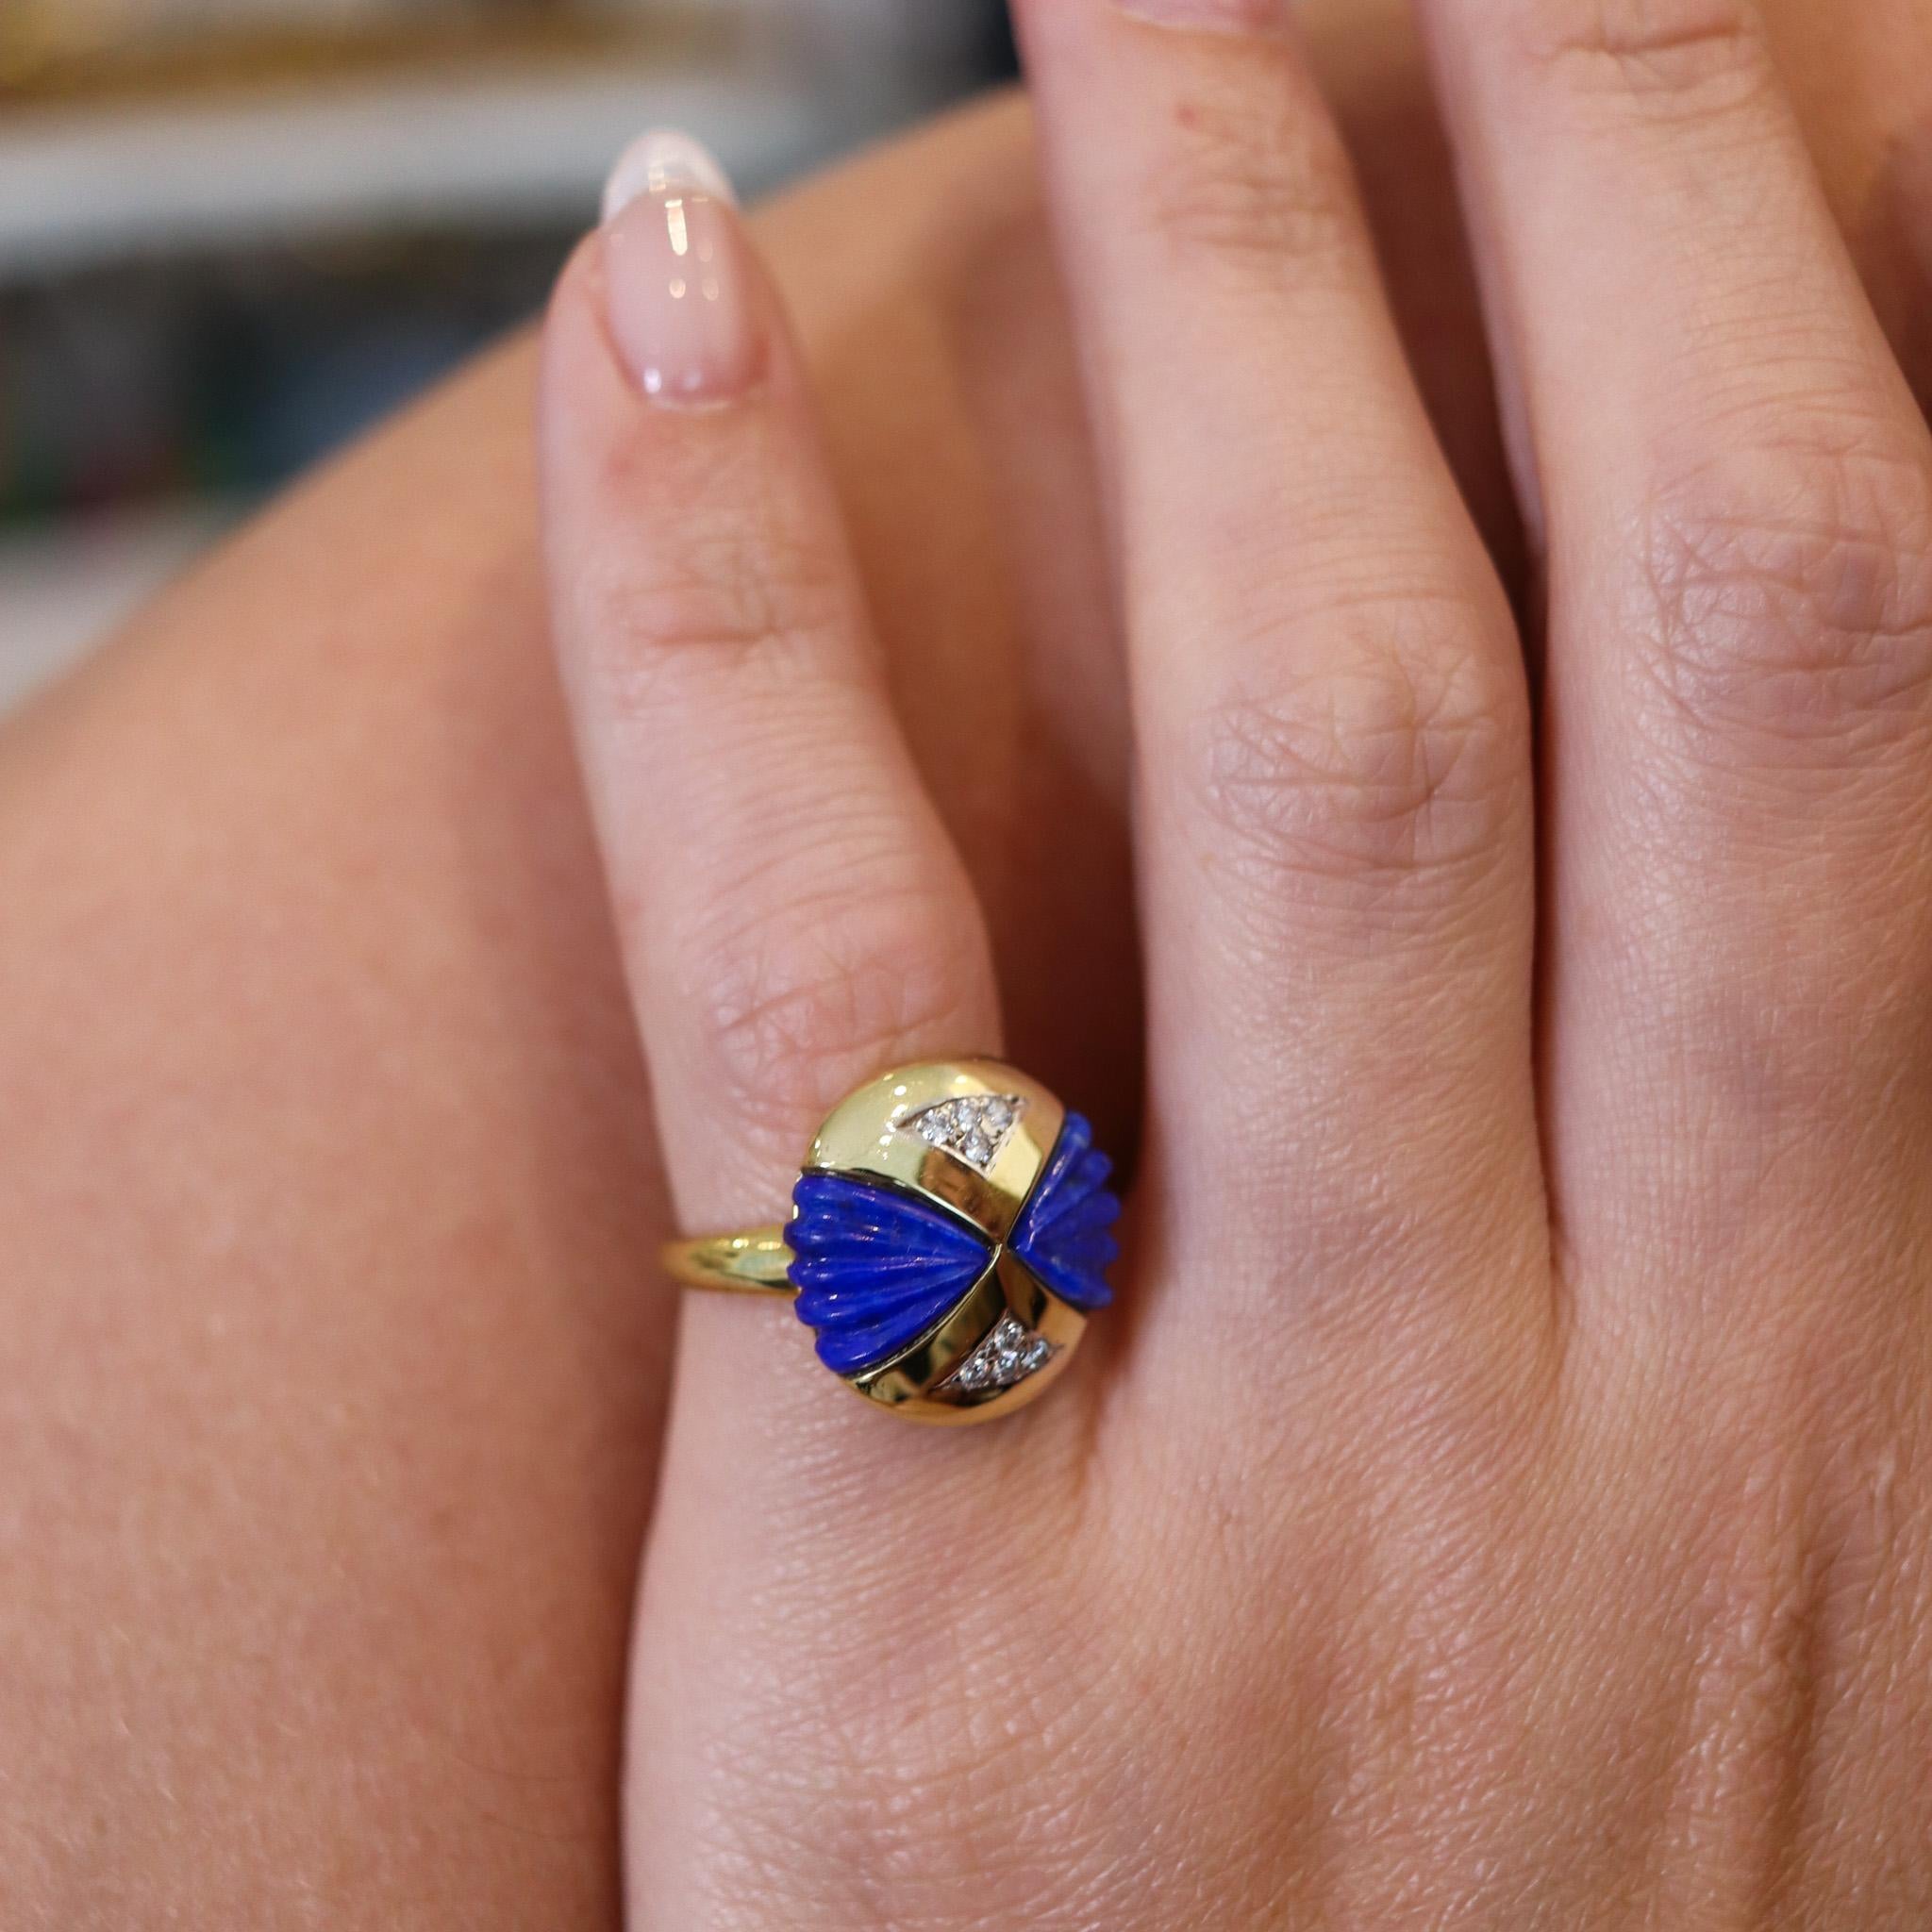 Modernist Sculptural Ring In 18Kt Yellow Gold With 3.24 Ctw Diamonds And Lapis For Sale 1